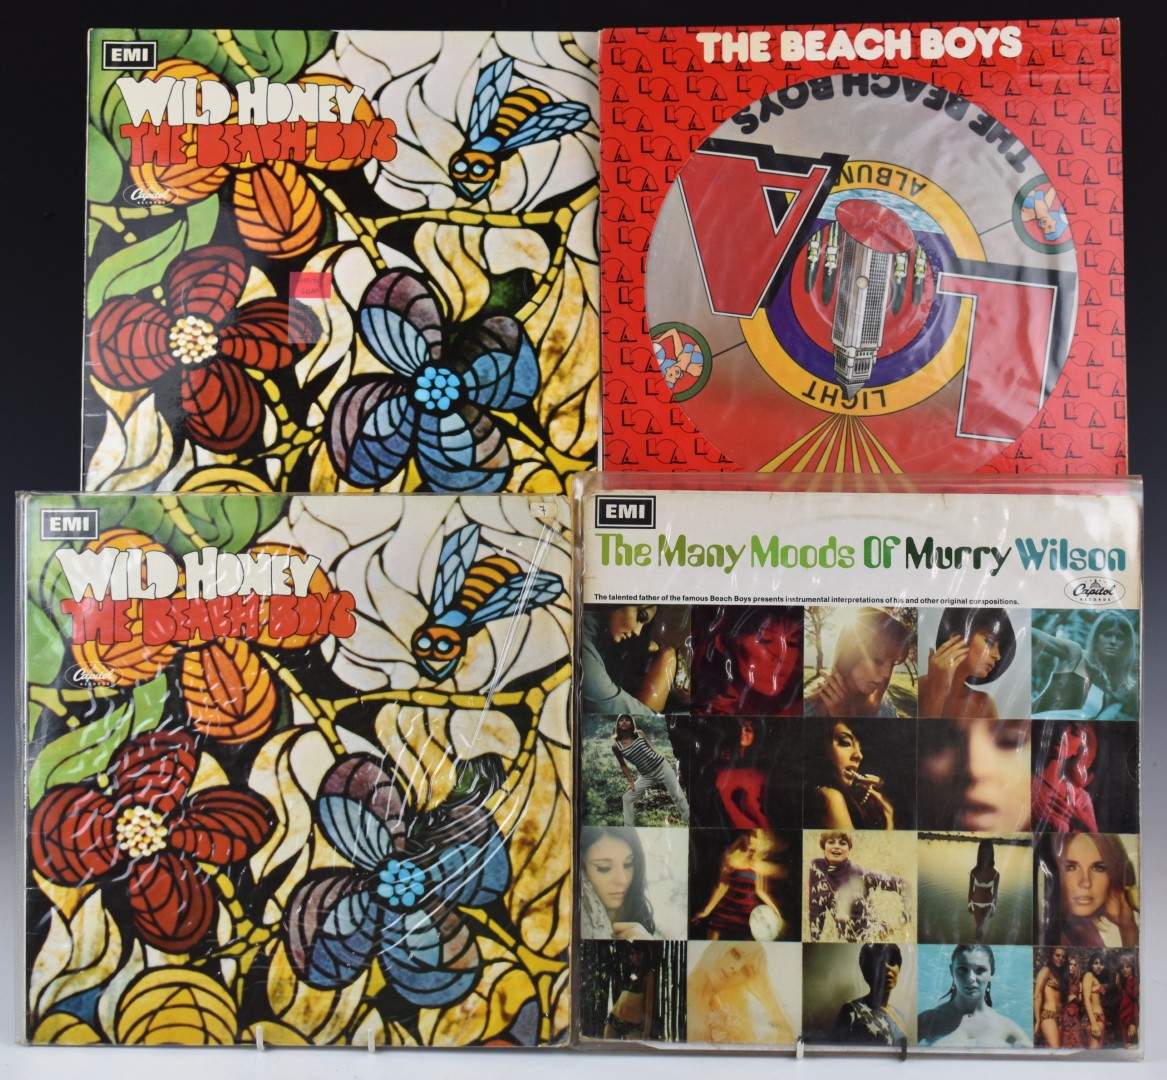 The Beach Boys - Fifty albums including Surfin' Safari, Smiley Smile, Pet Sounds, Surfs Up, Little - Image 2 of 4